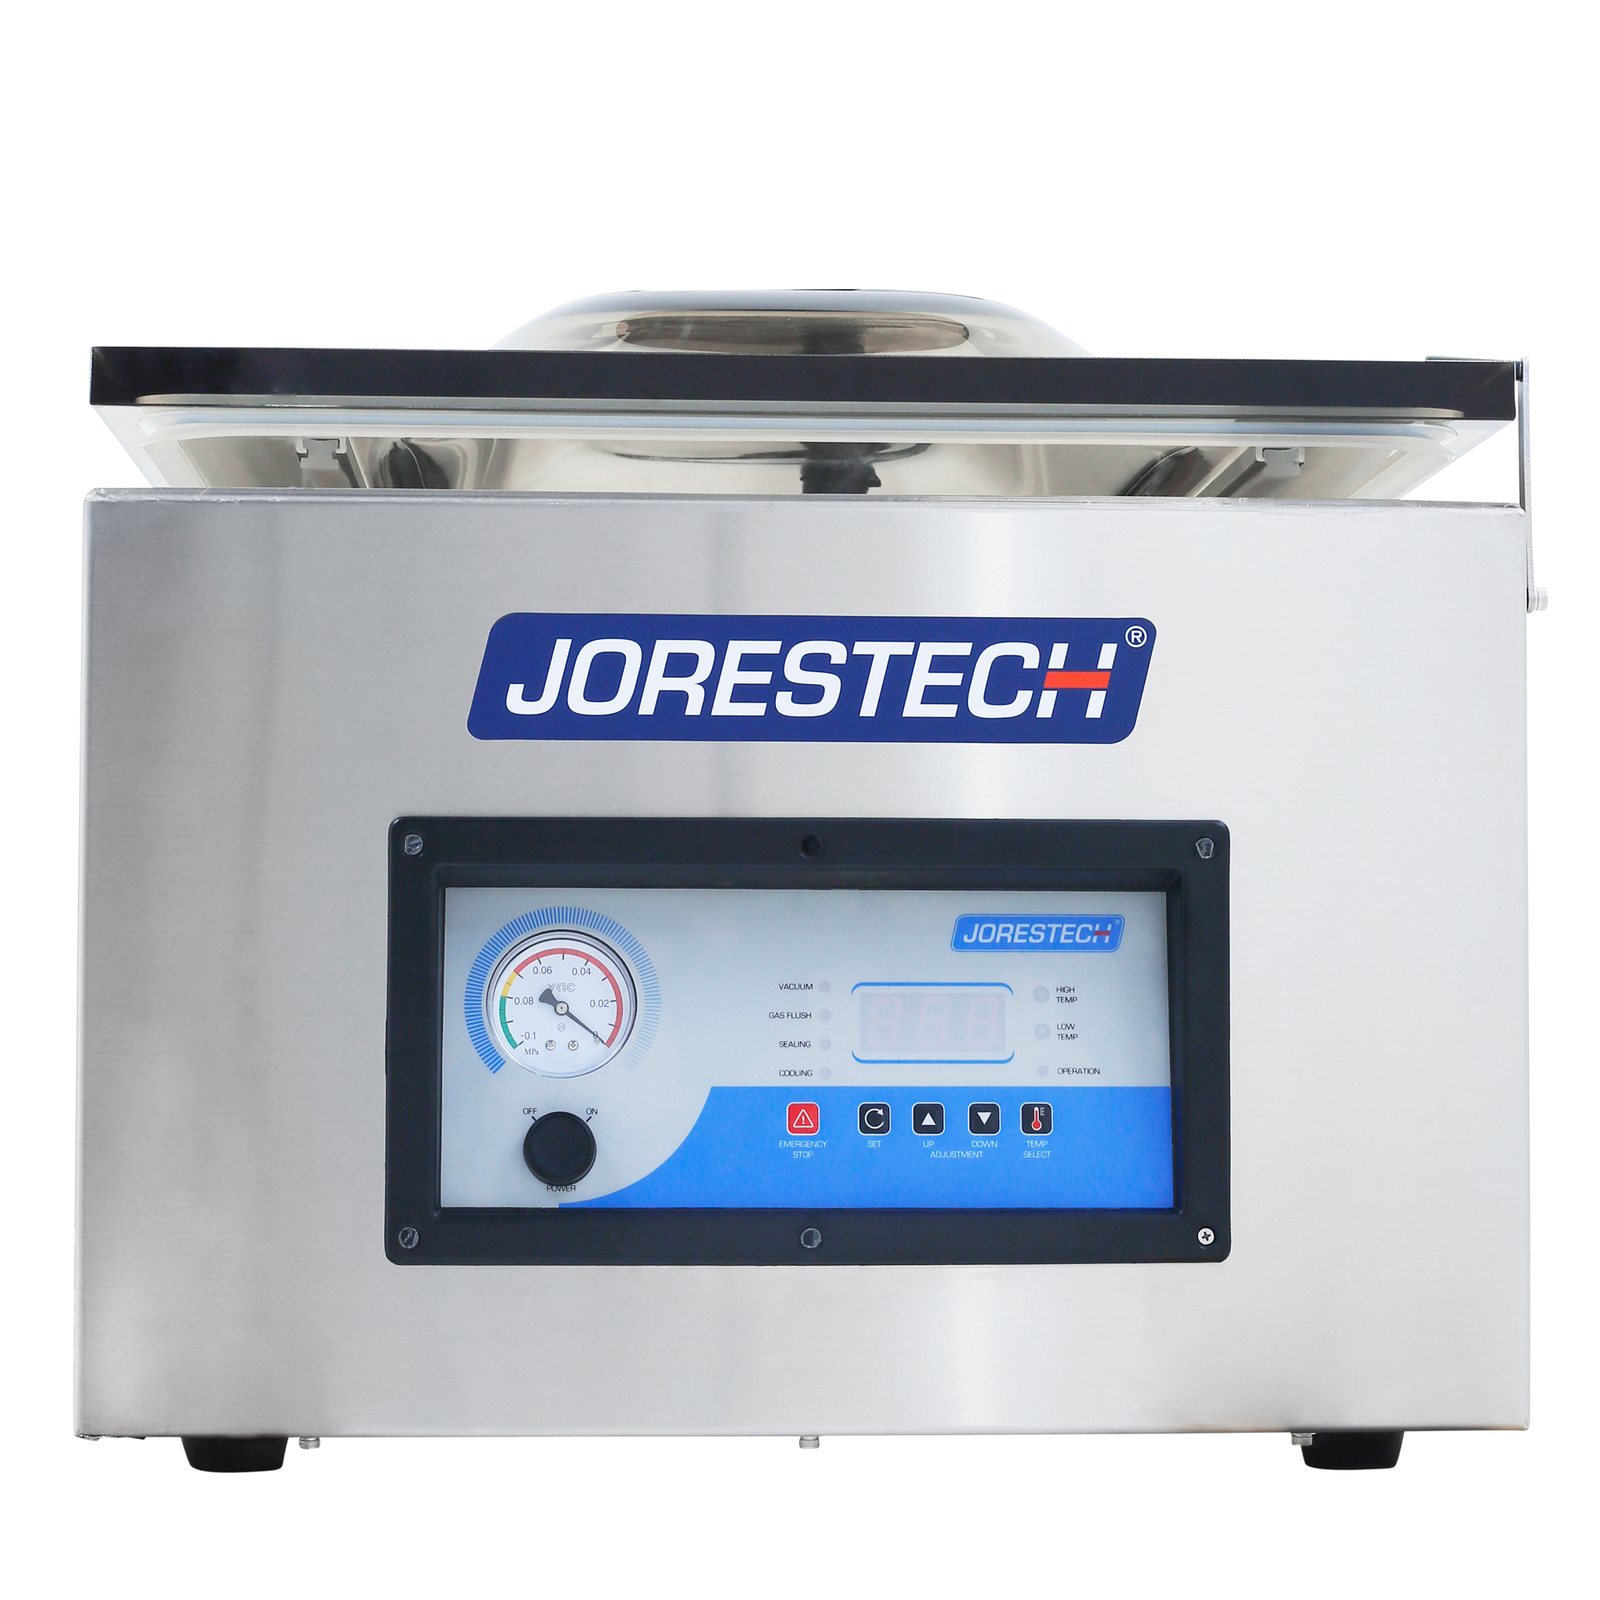 Front of the stainless steal JORES TECHNOLOGIES® tabletop commercial single chamber vacuum sealer with dual seal. The lid of the vacuum sealer is closed with the holding bracket